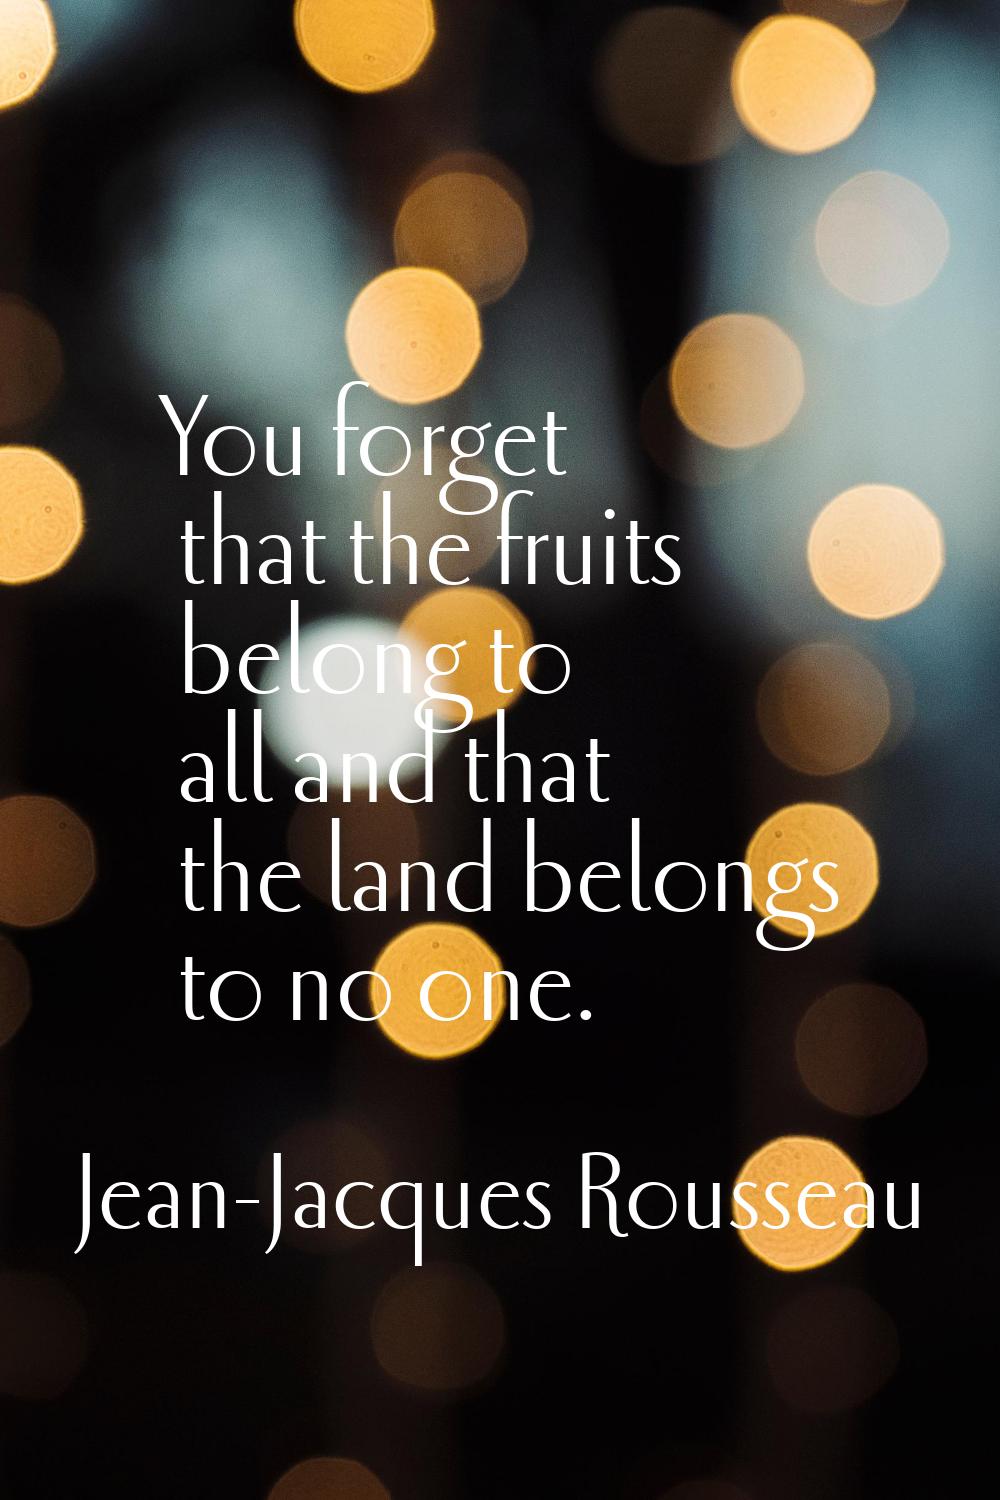 You forget that the fruits belong to all and that the land belongs to no one.